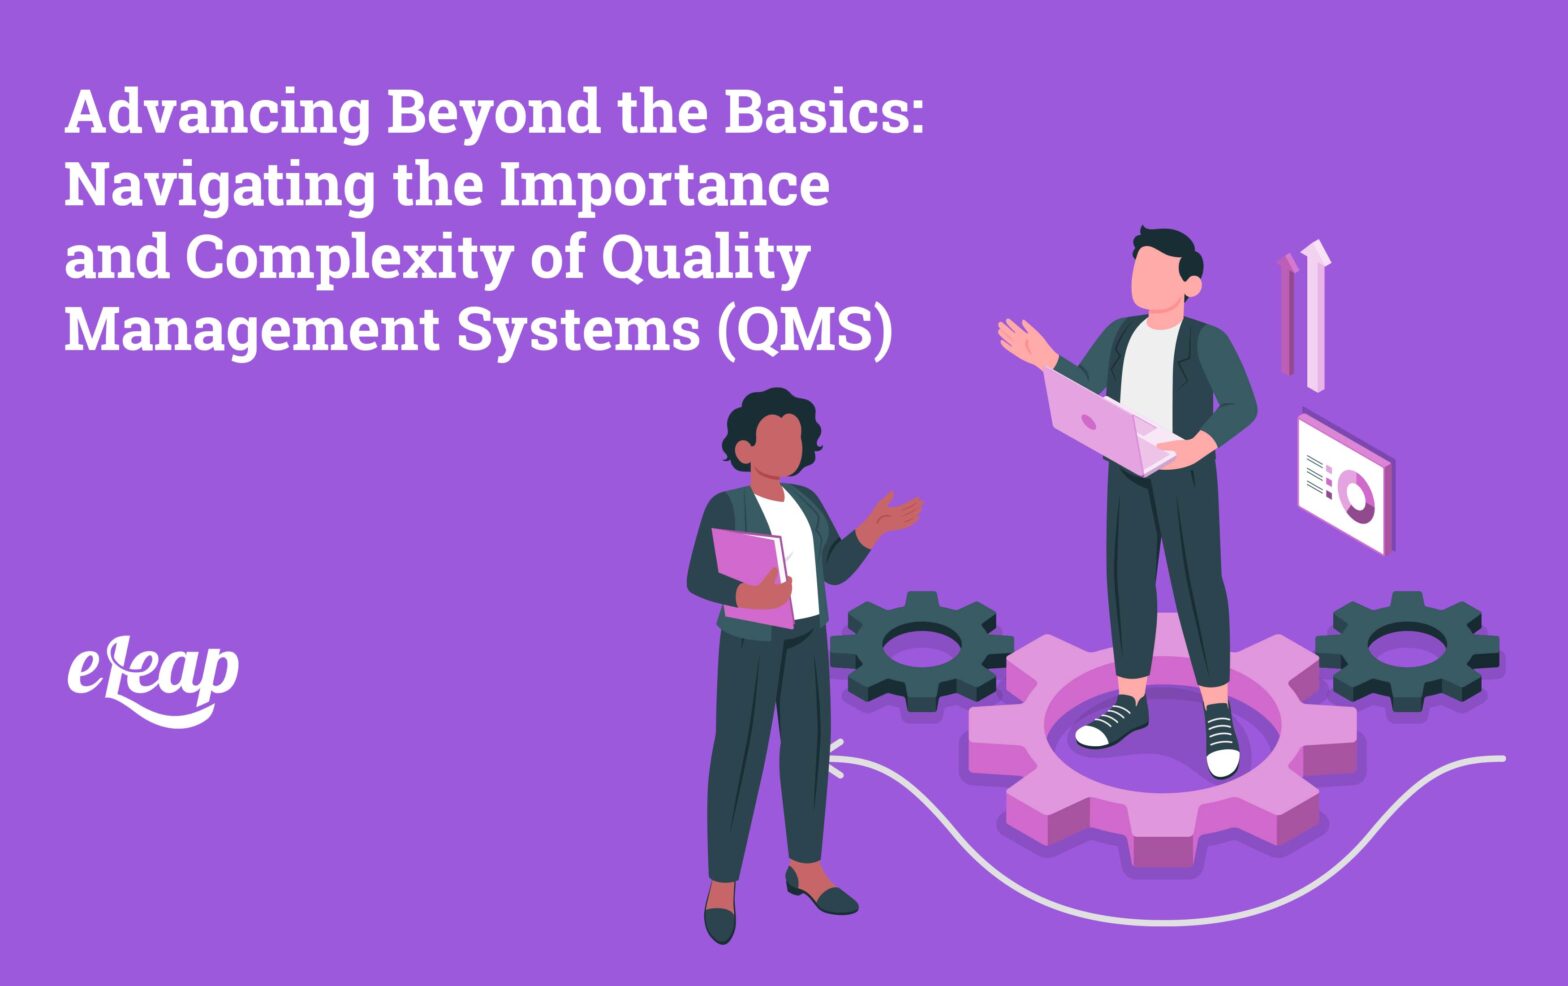 Advancing Beyond the Basics: Navigating the Importance and Complexity of Quality Management Systems (QMS)